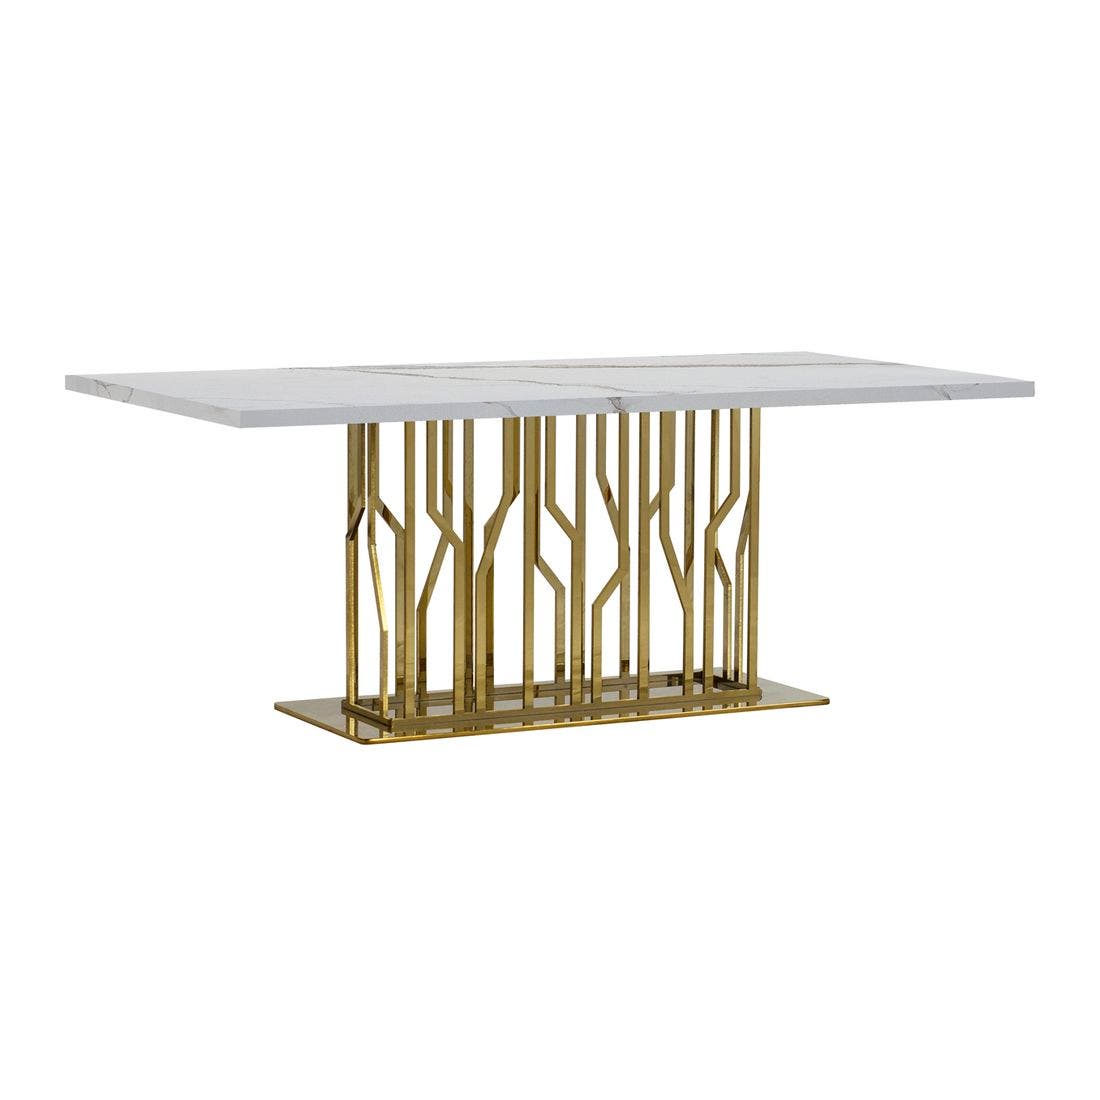 59021665-base-sb02-s-furniture-dining-room-dining-tables-01